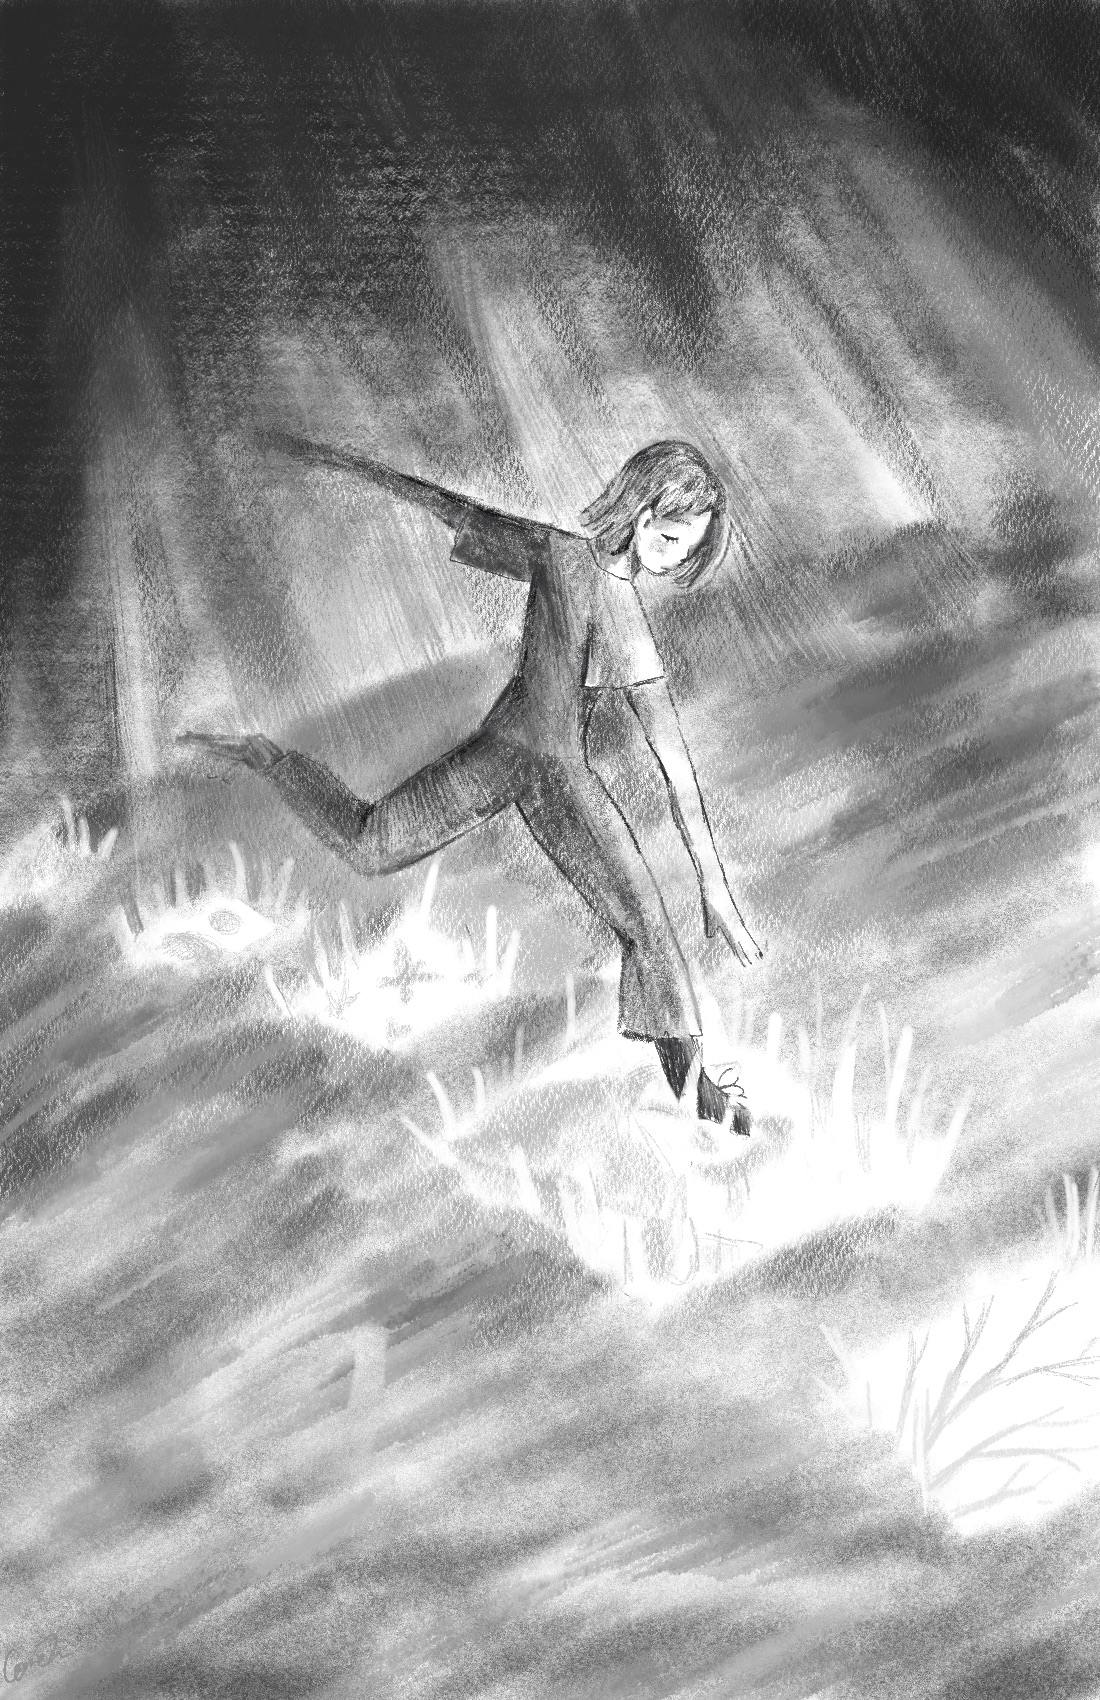 A person with a bob and bangs runs through a field. They are on a path made of square-shaped patches of grass, which seem to be glowing.